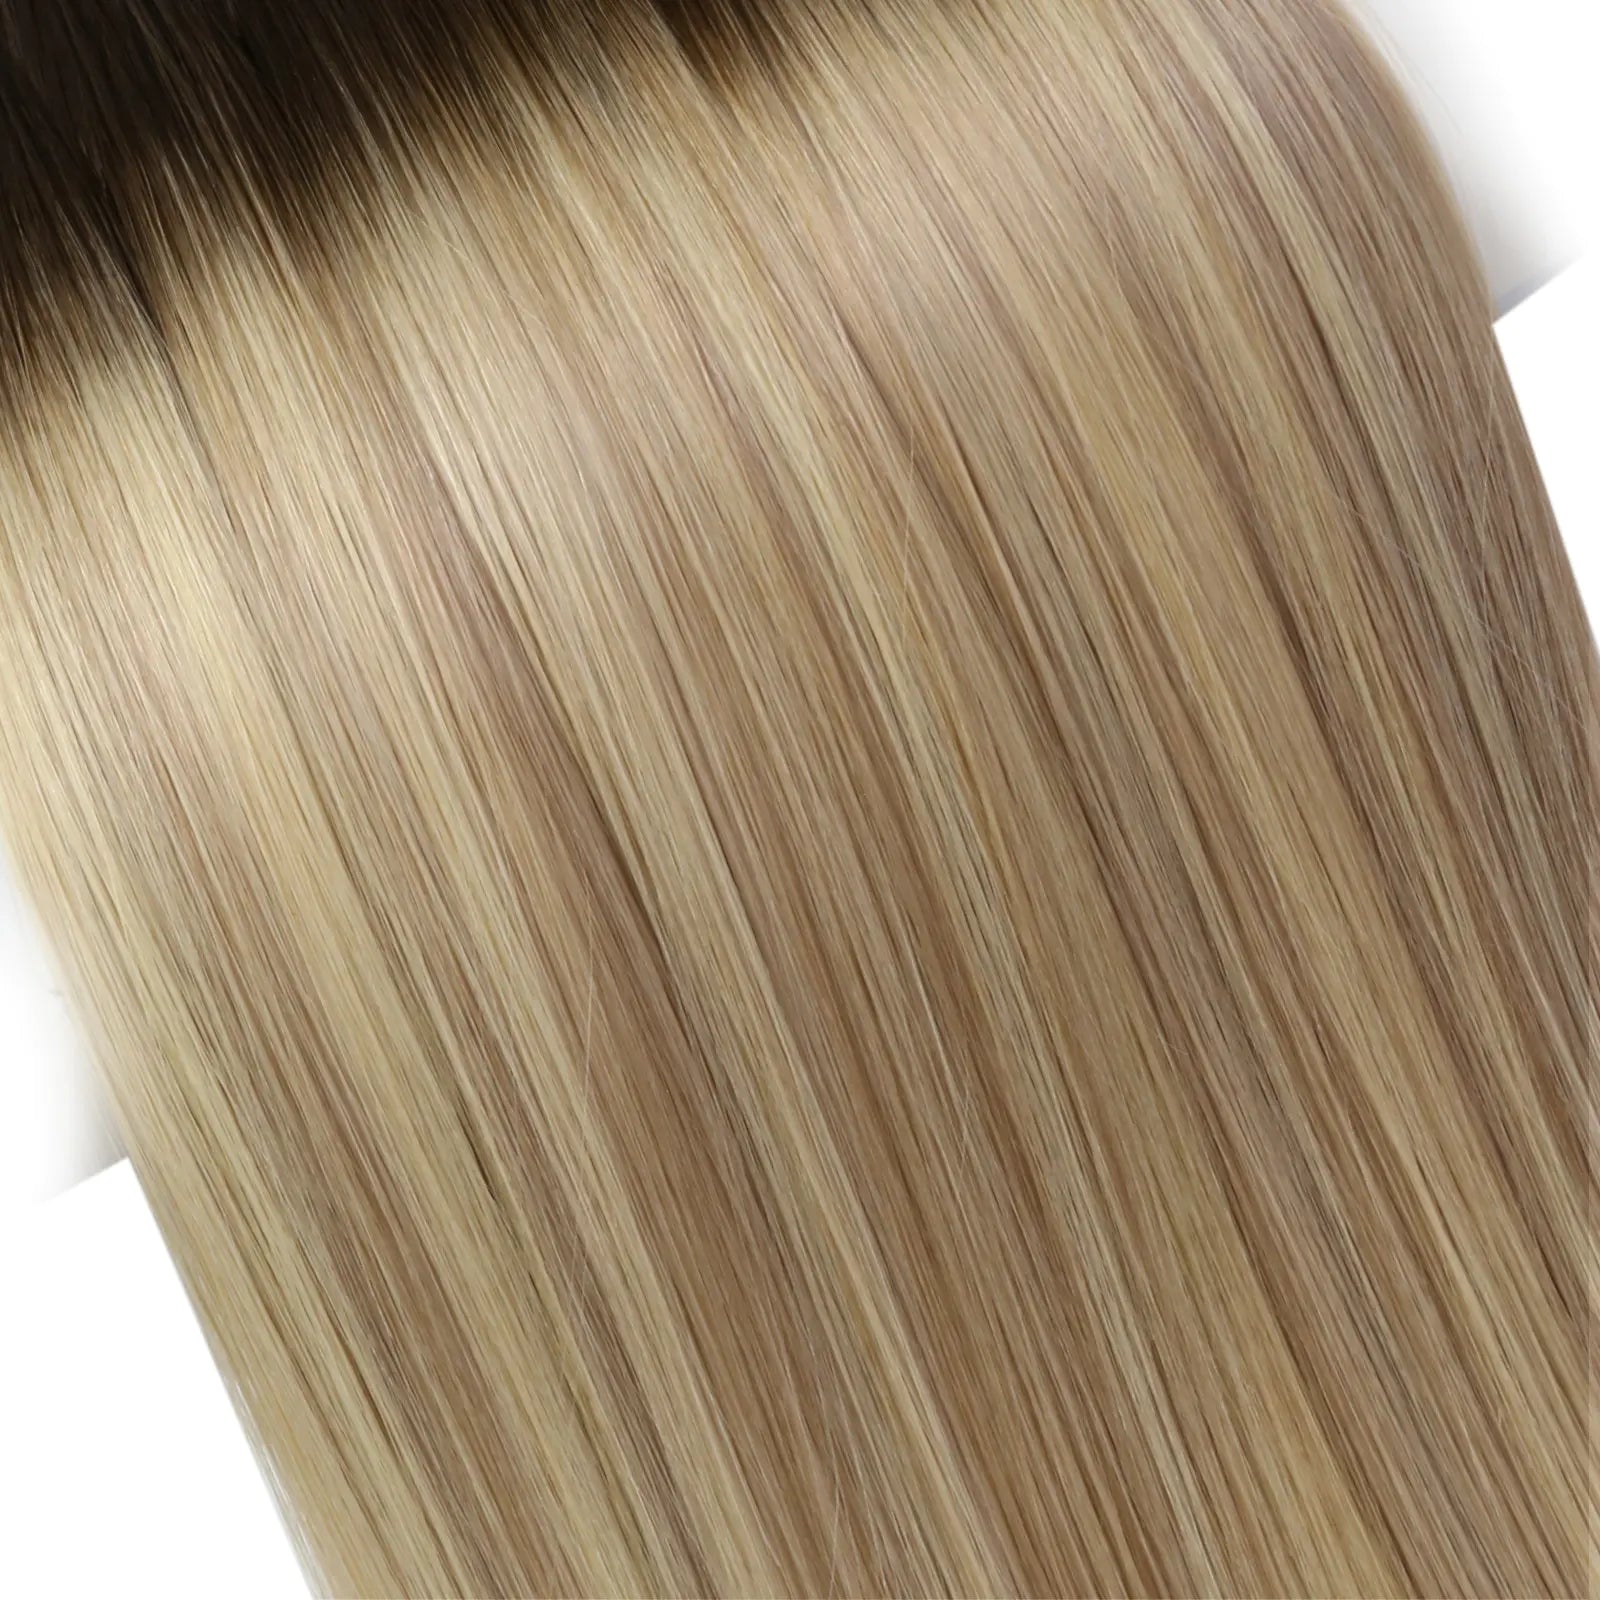 Best Full Cuticle Hybrid Weft Extensions Human Hair Balayage Color